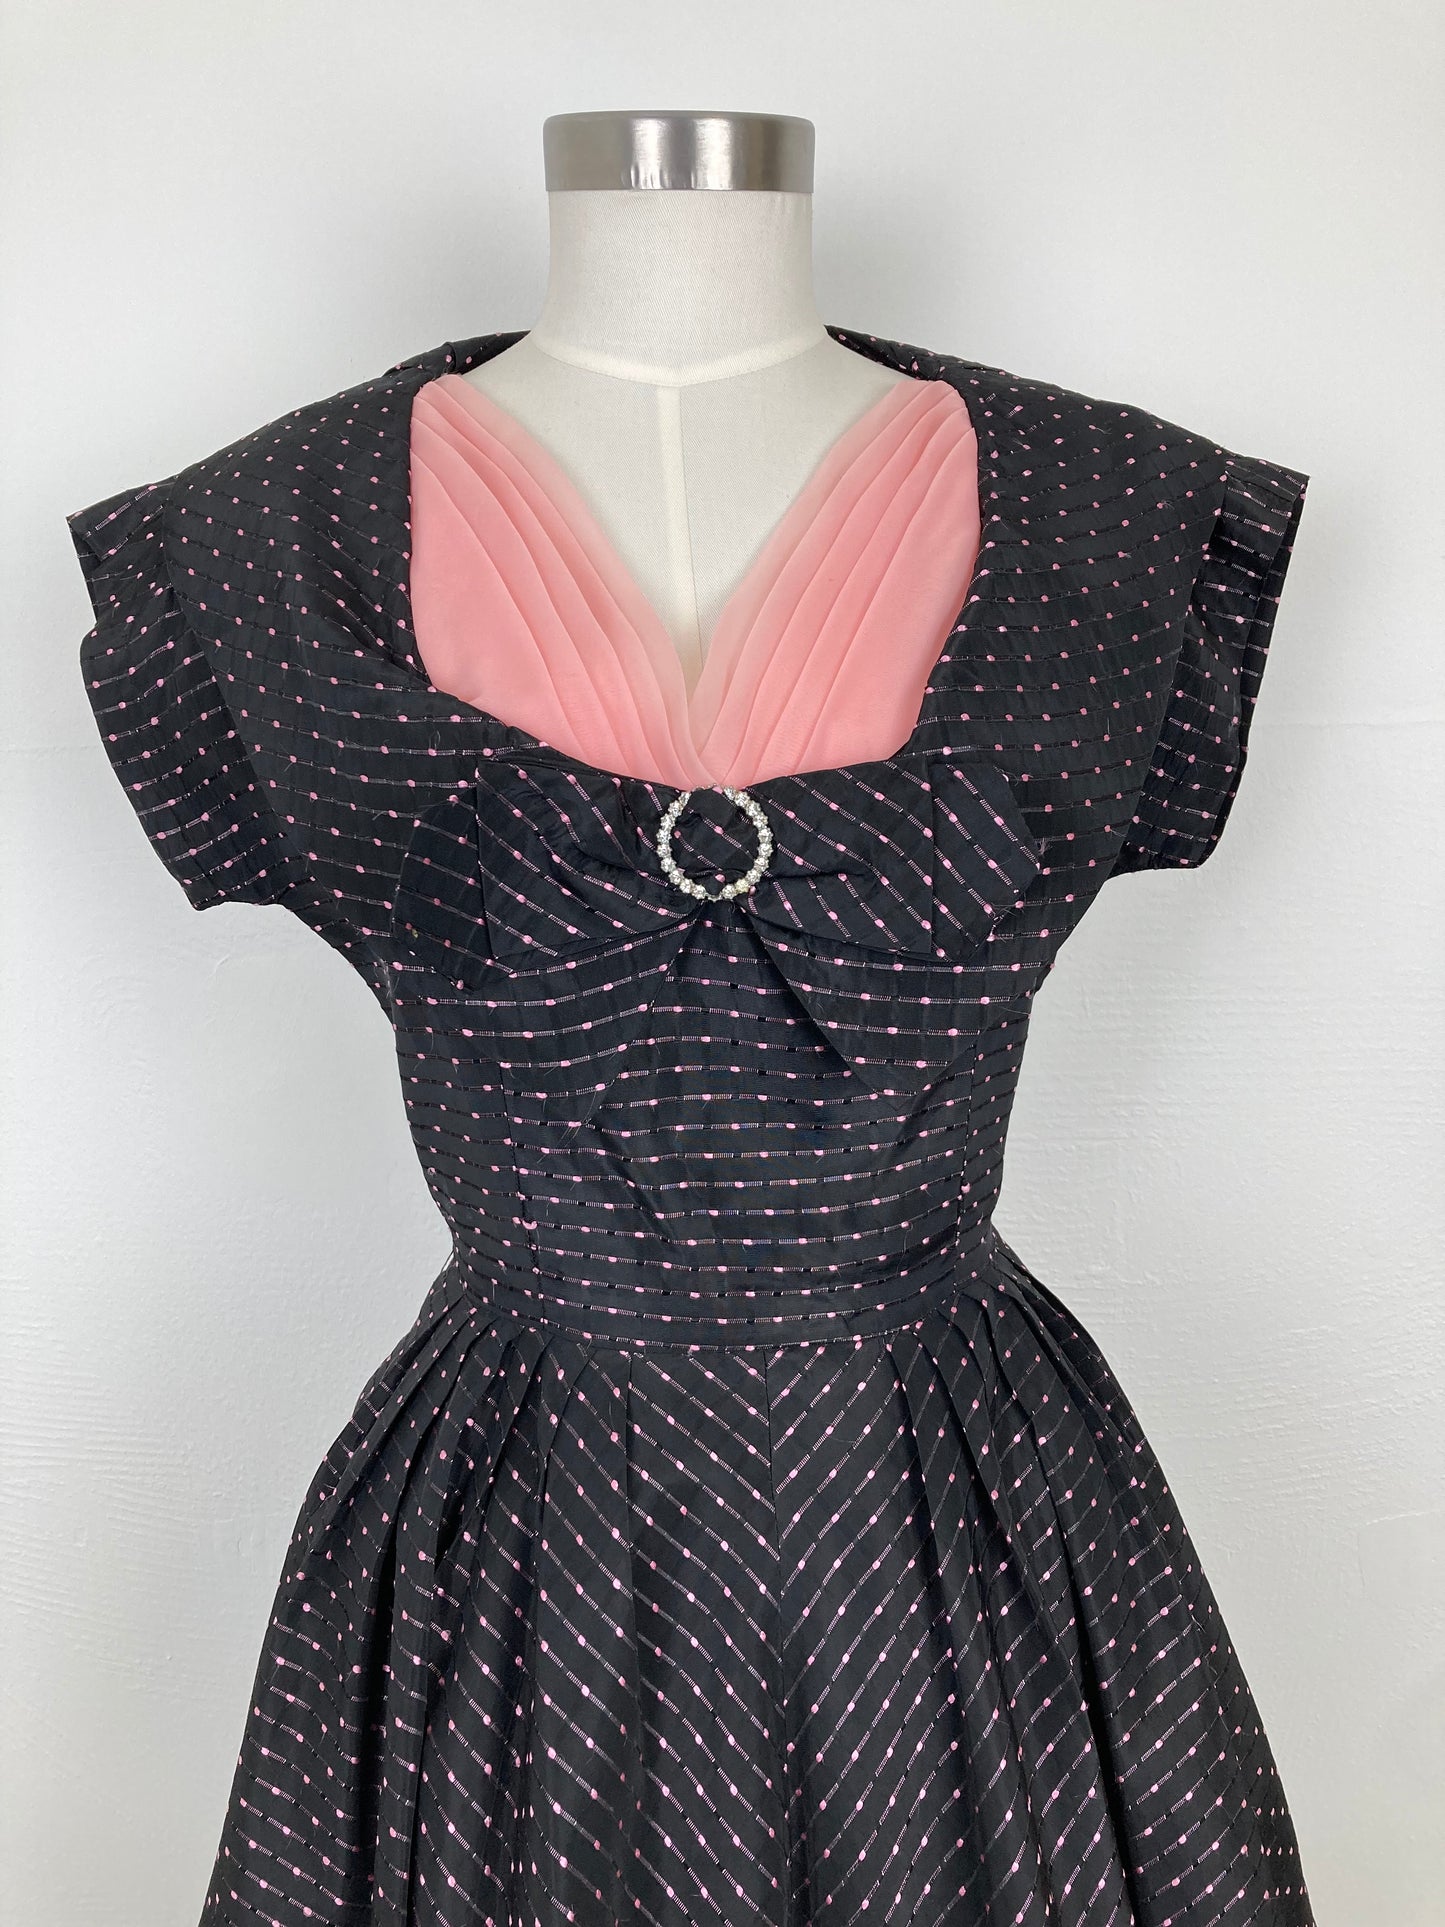 1950s Black and Pink Party Dress, Size M